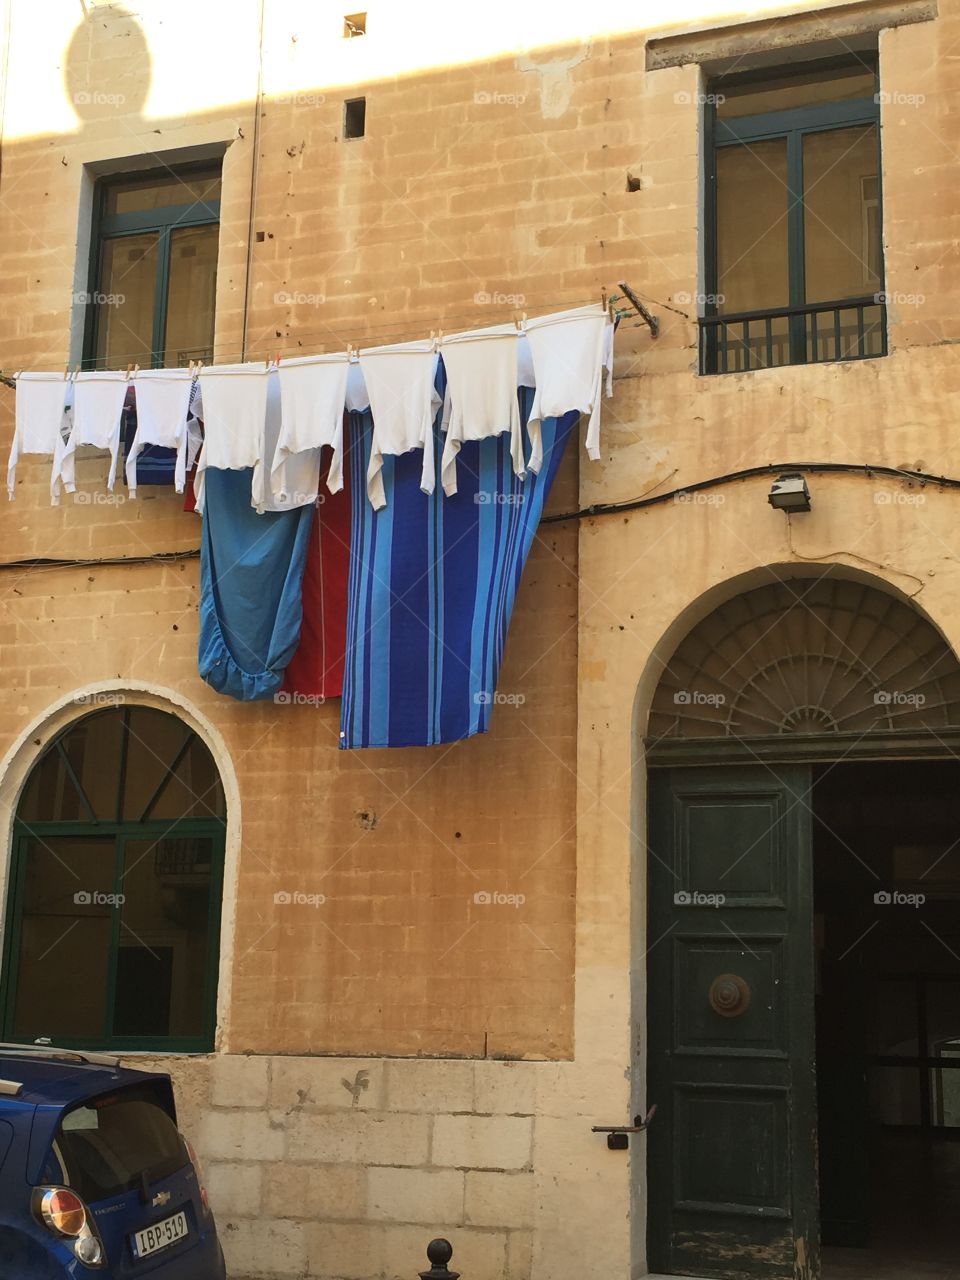 Windows around the World. Windows provide access to washing lines in the Capital City of Valletta, Malta. 
(Wash Day).